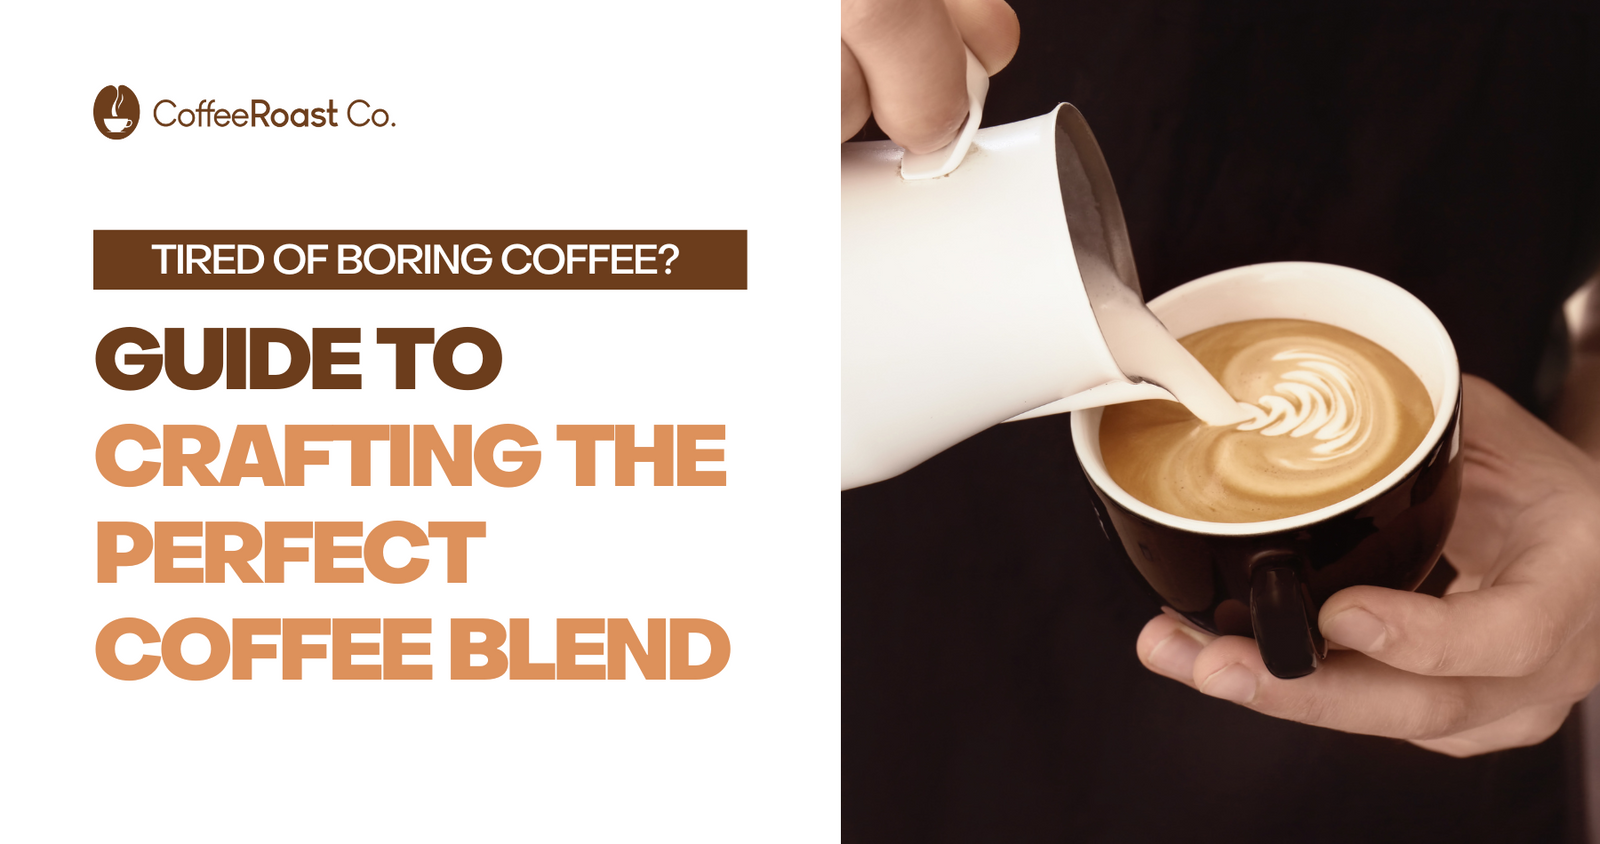 Tired of Boring Coffee? Here's Your Guide to Crafting the Perfect Coffee Blend